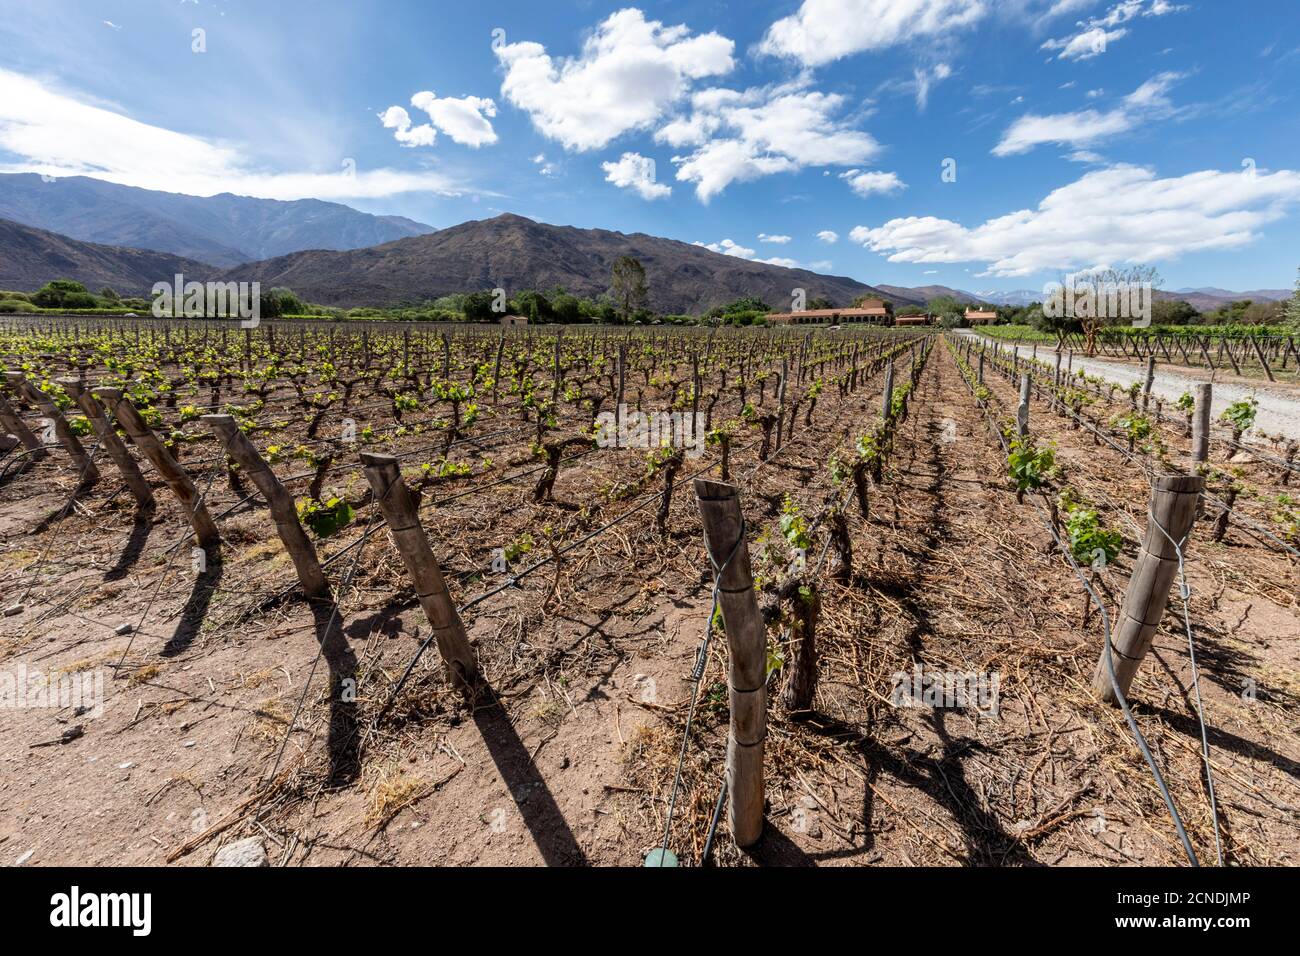 Estancia Colome, vineyards located in the high Calchaqui valley at 2300 meters above sea level, Salta Province, Argentina Stock Photo